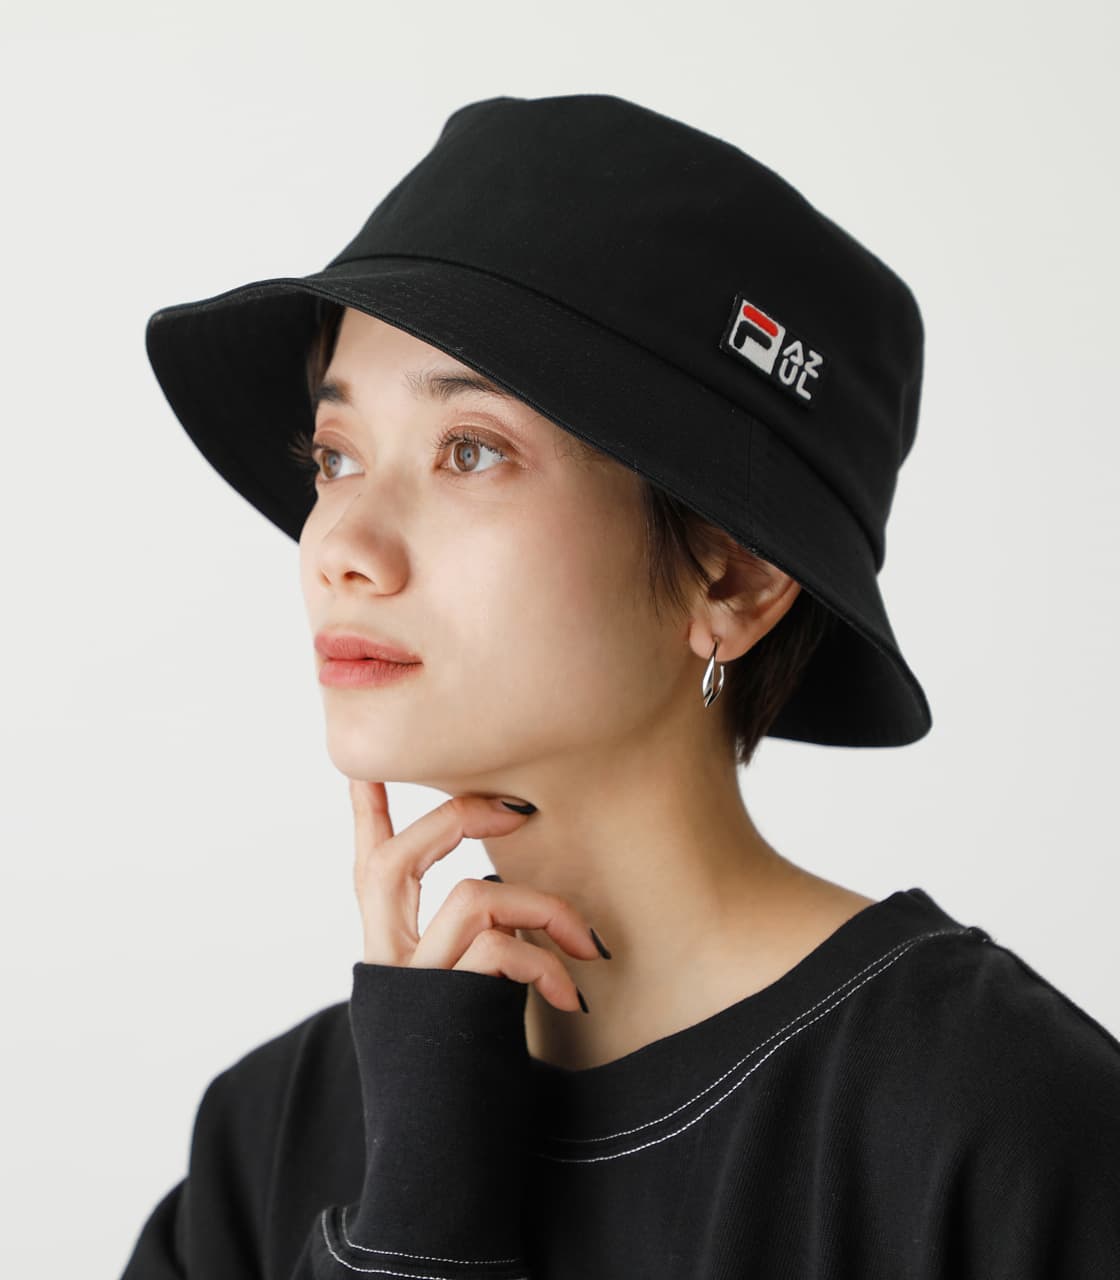 Collective Mover Coin laundry FILA×AZUL BUCKET HAT｜M｜IVOY｜帽子｜バロックジャパンリミテッド 公式通販サイト SHEL'TTER WEB  STORE(シェルターウェブストア)